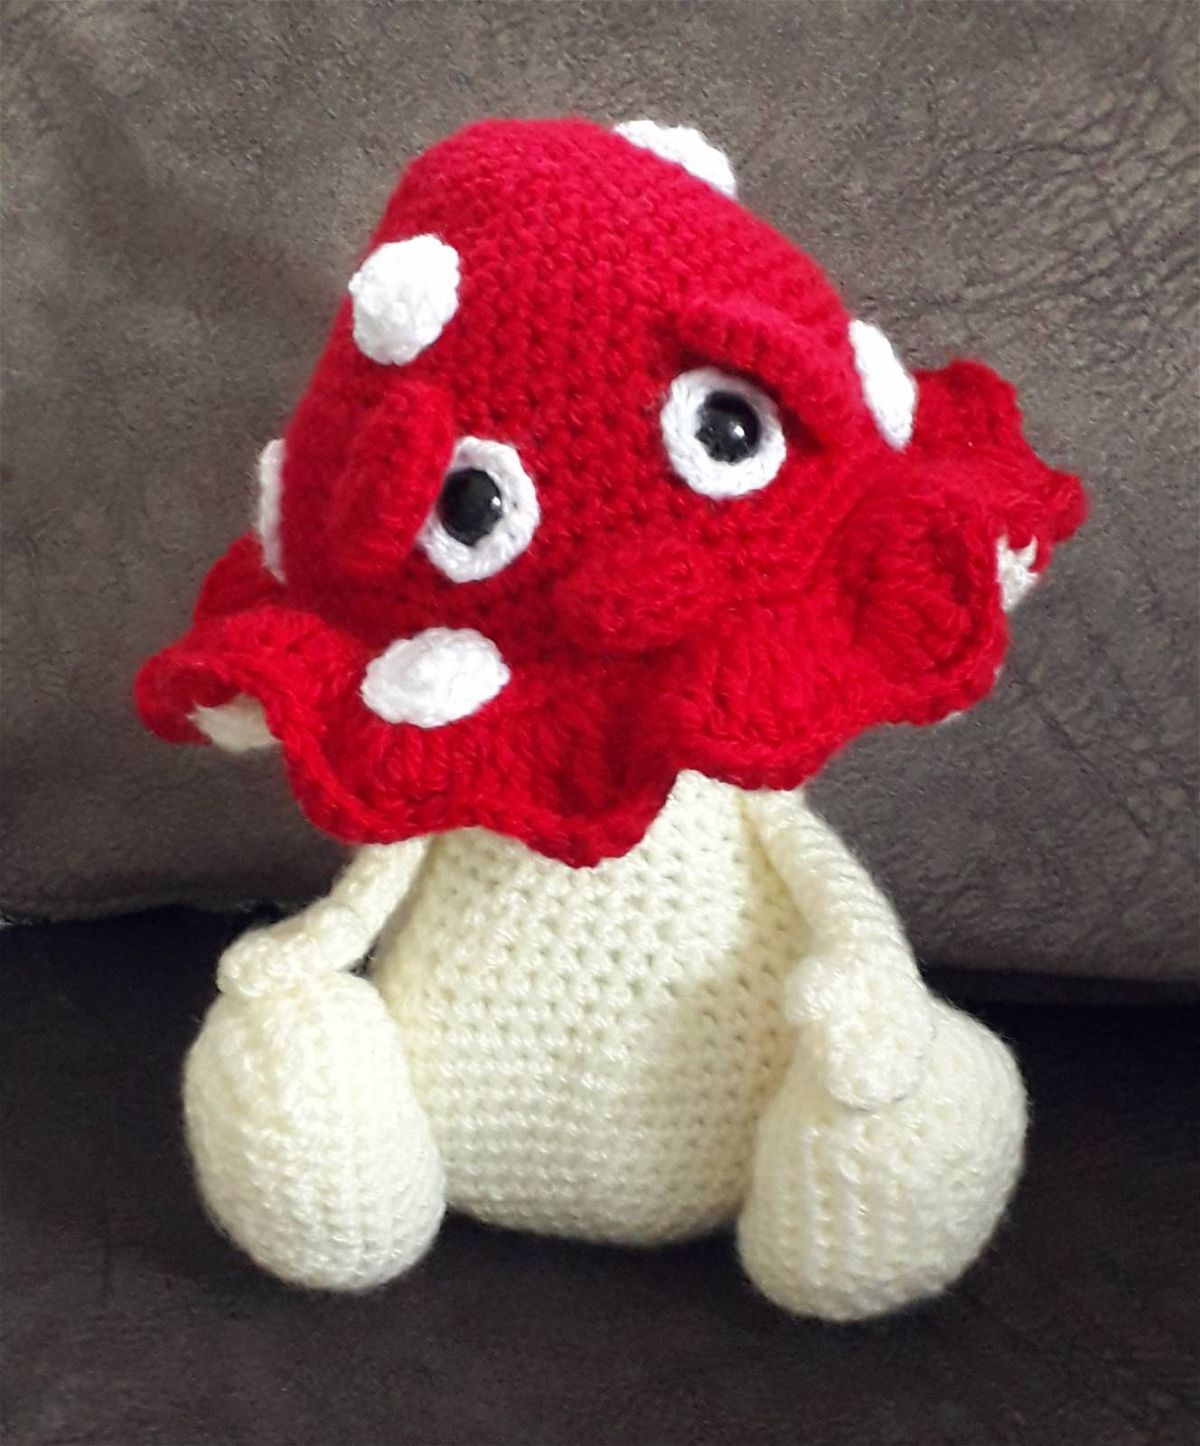 Stanley shroom crochet pattern review for Cottontail and Whiskers by Julie Ridge